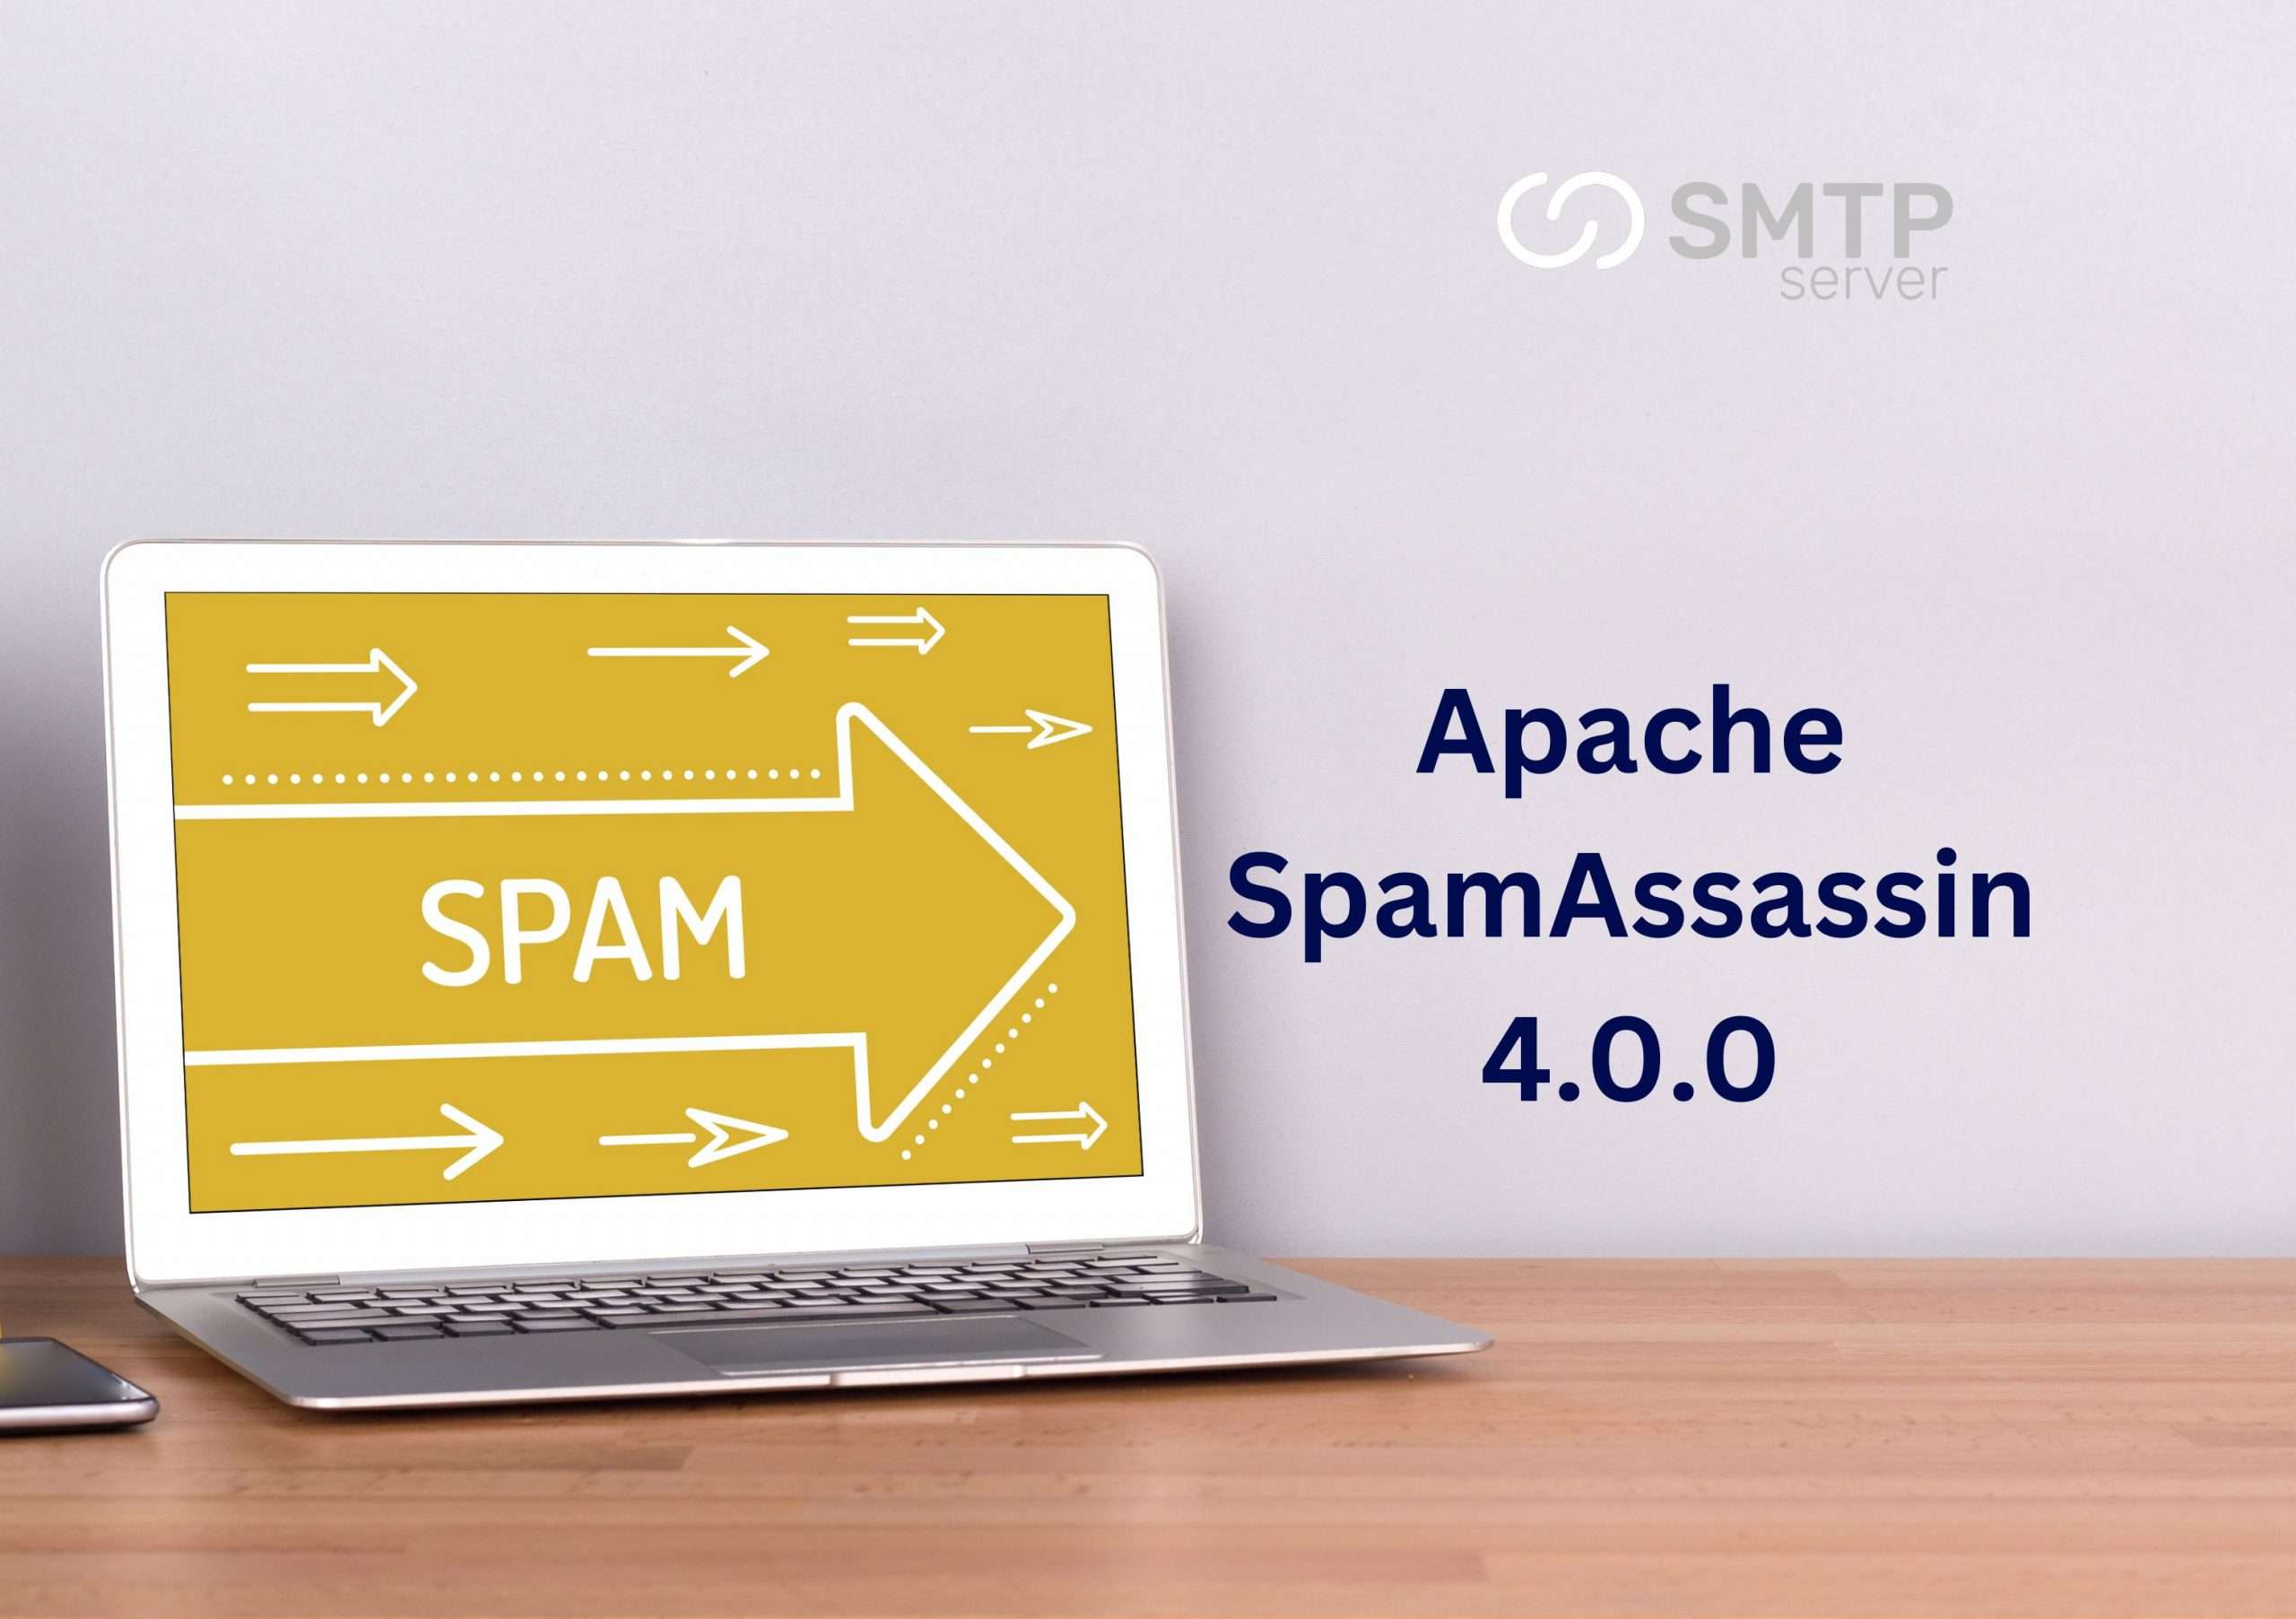 Release of Apache SpamAssassin 4.0.0, featuring enhanced classification and performance